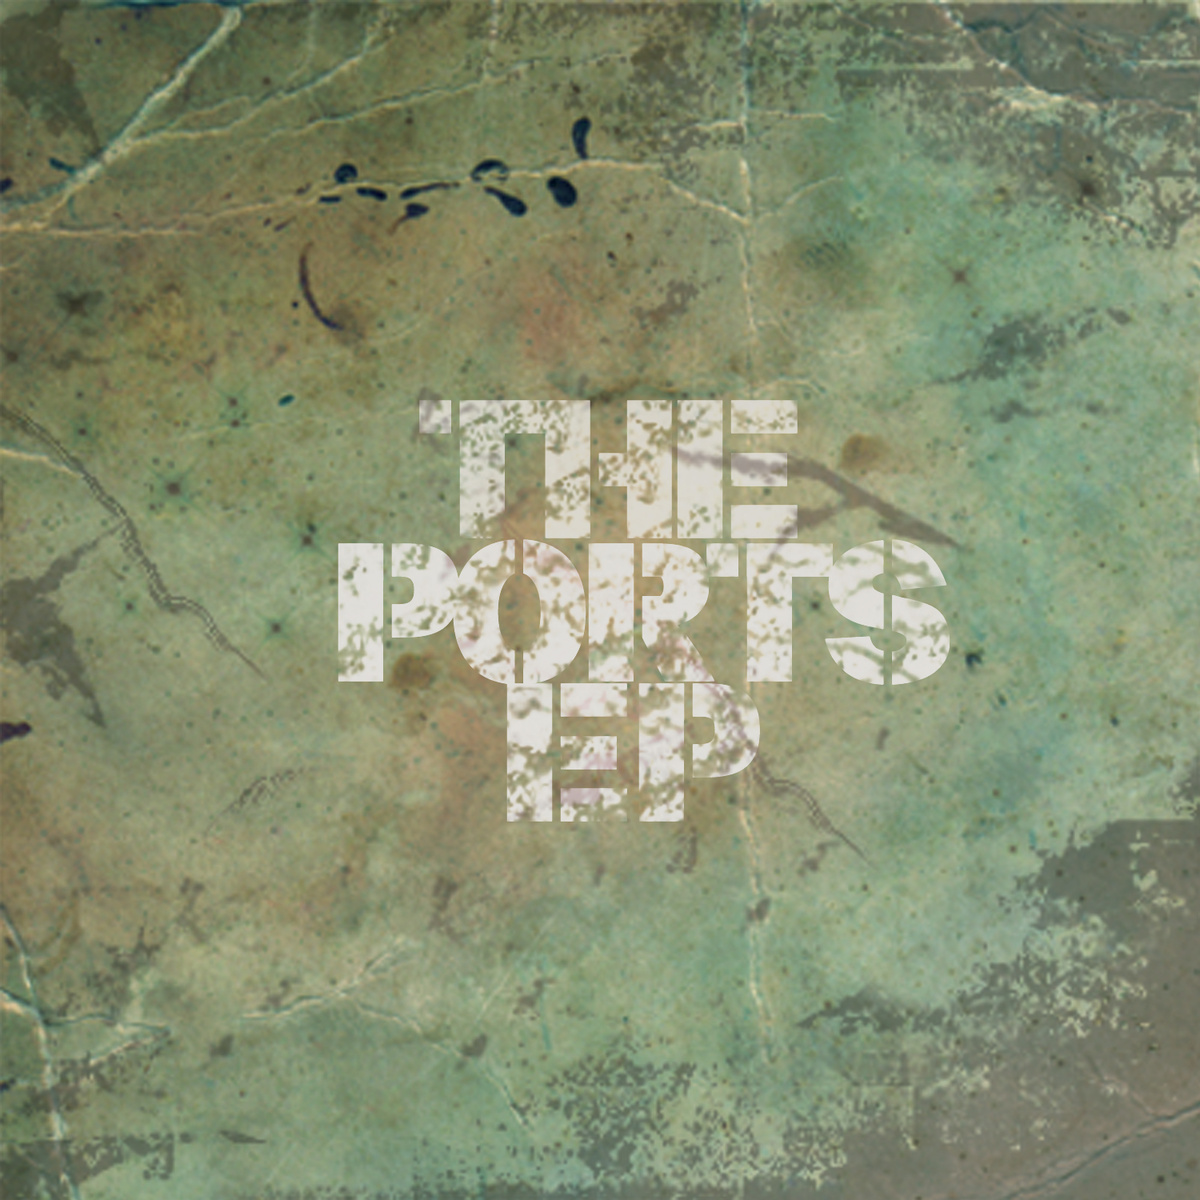 J57 "2057 EP" & "The Ports EP" Releases | @_J57 @BrownBagAllstar 